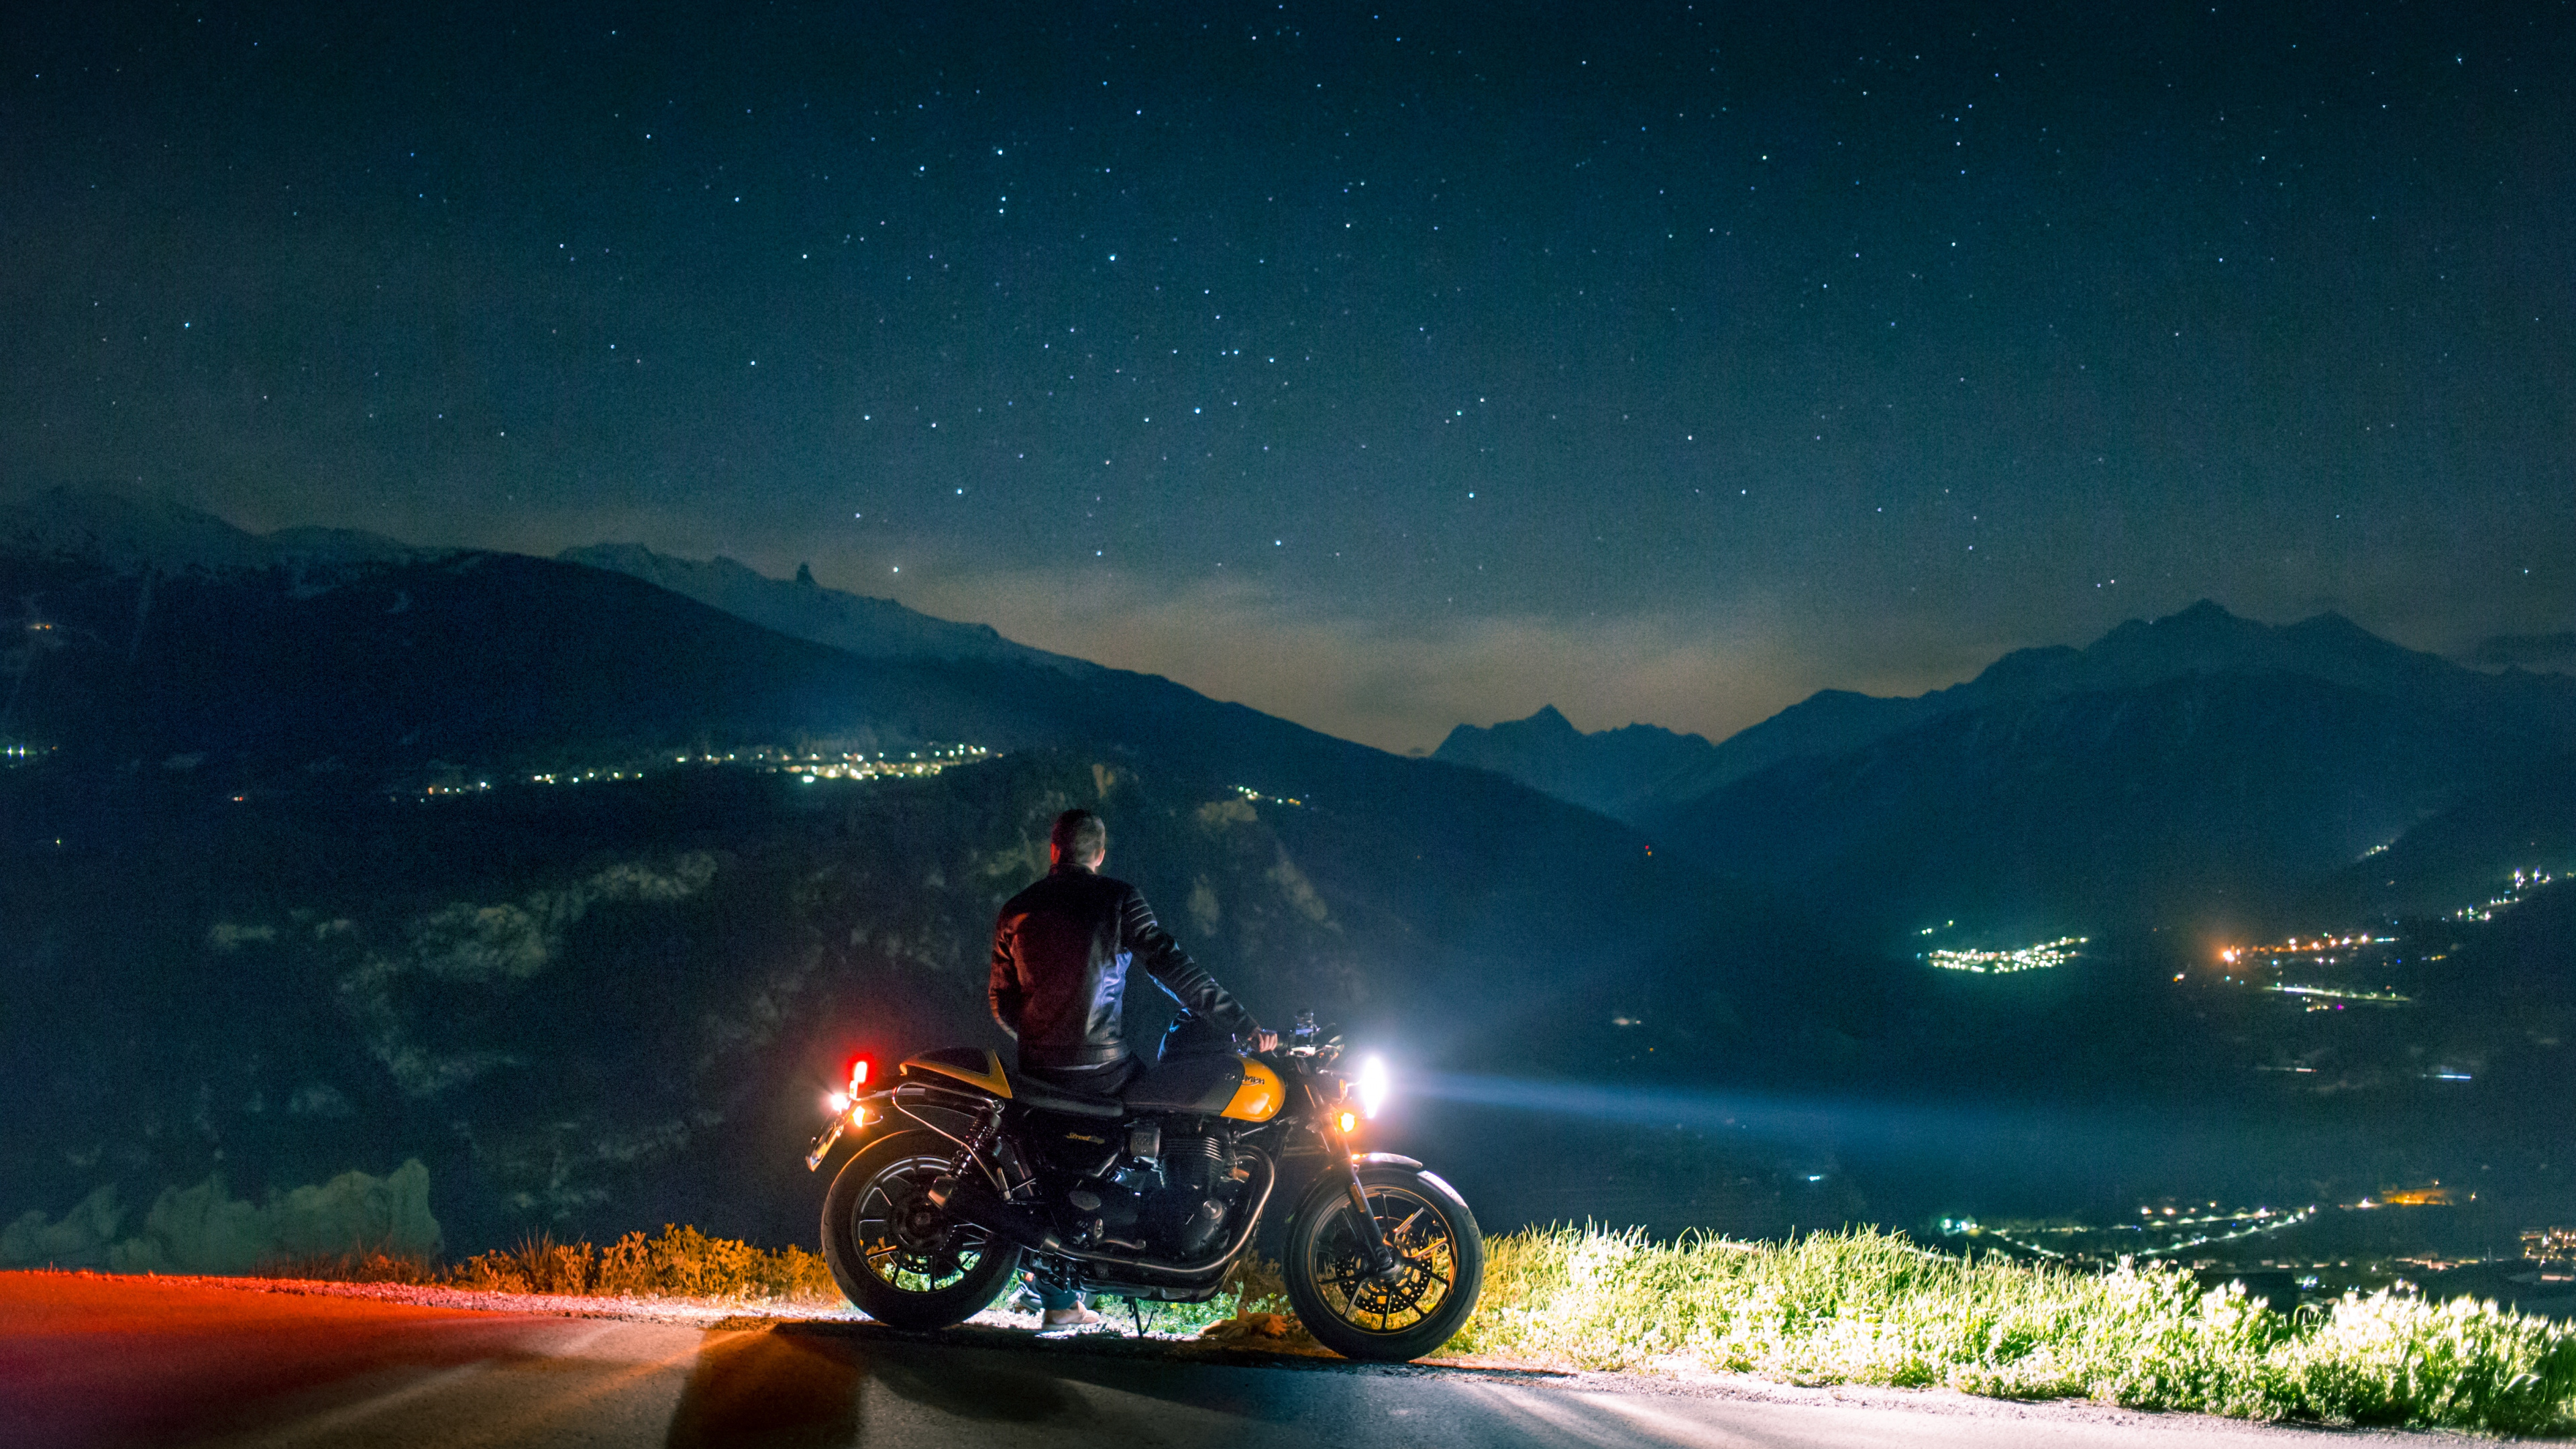 Man Riding Motorcycle on Road During Night Time. Wallpaper in 3840x2160 Resolution